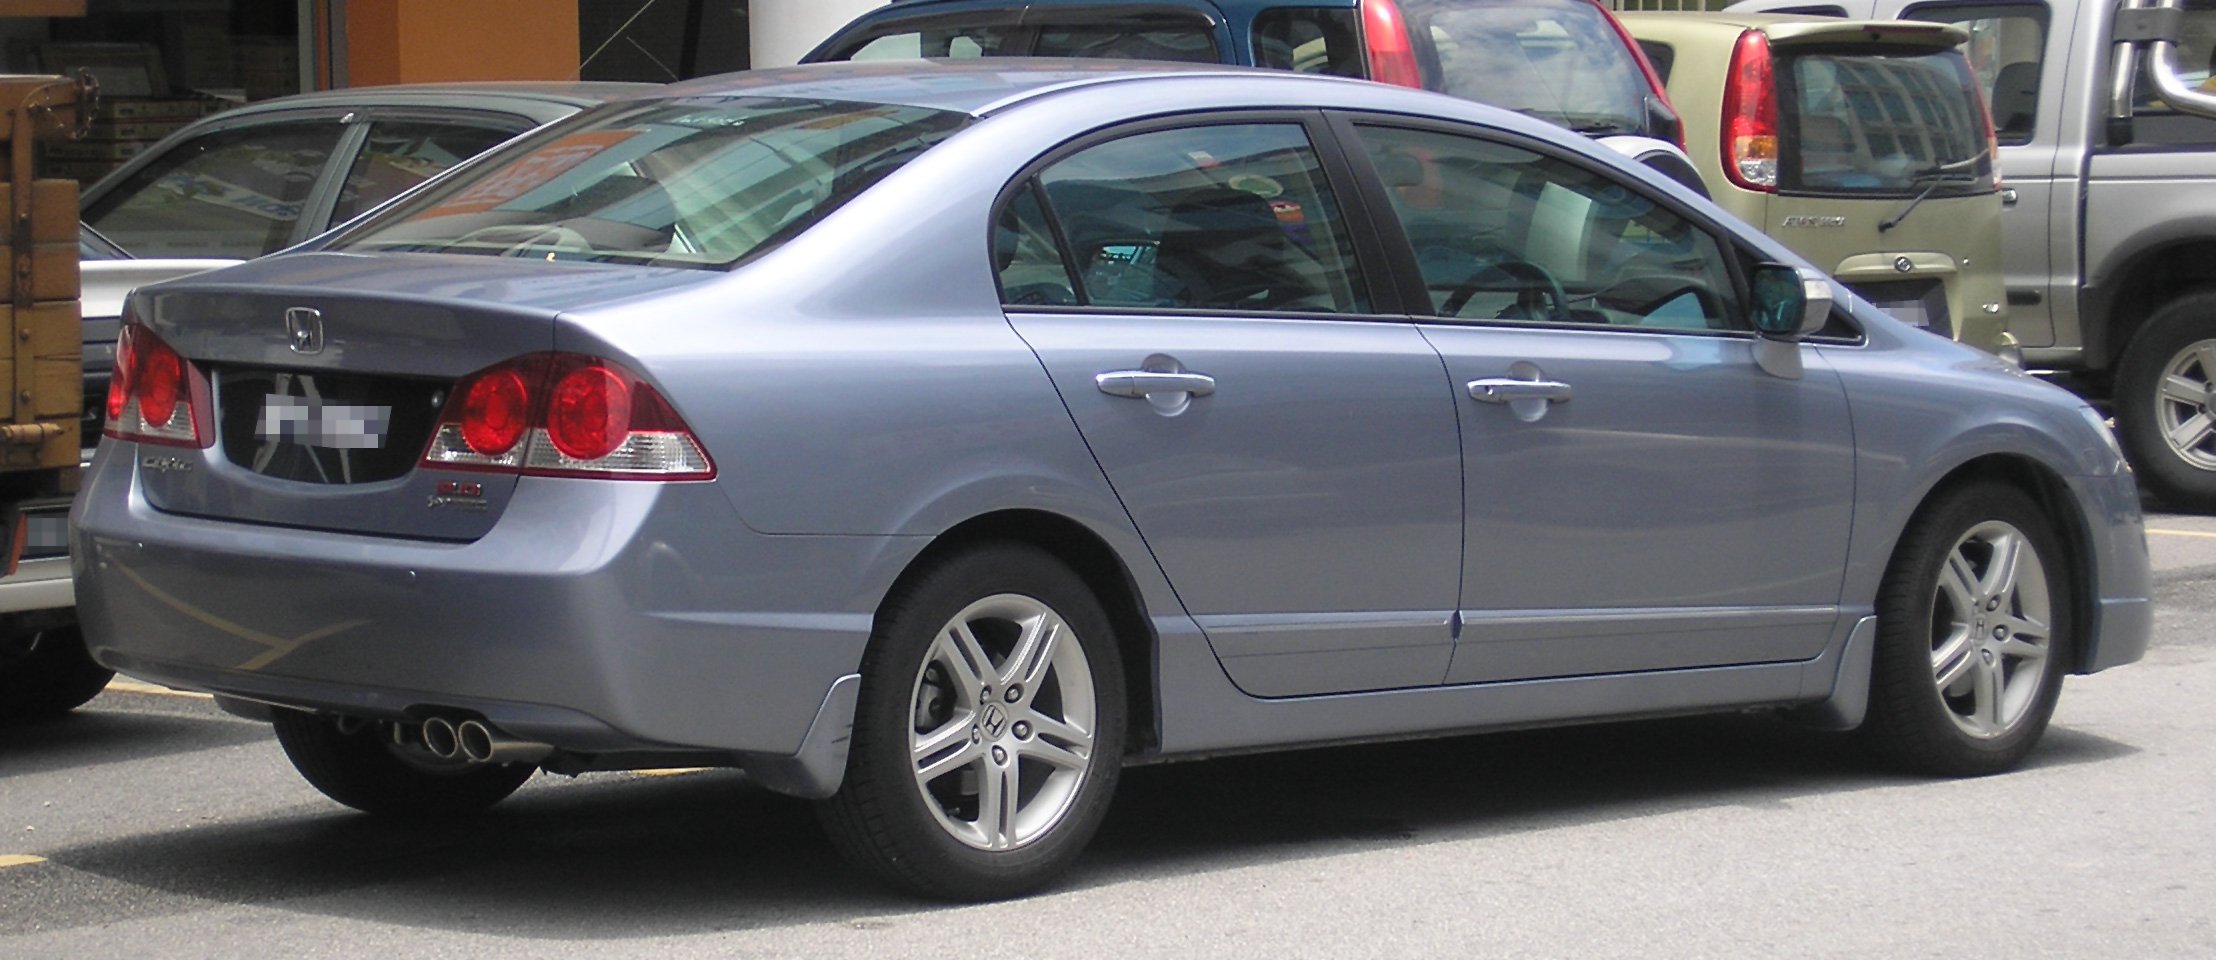 2005 Honda Civic, the best used cars for sale under ₦1 Million.